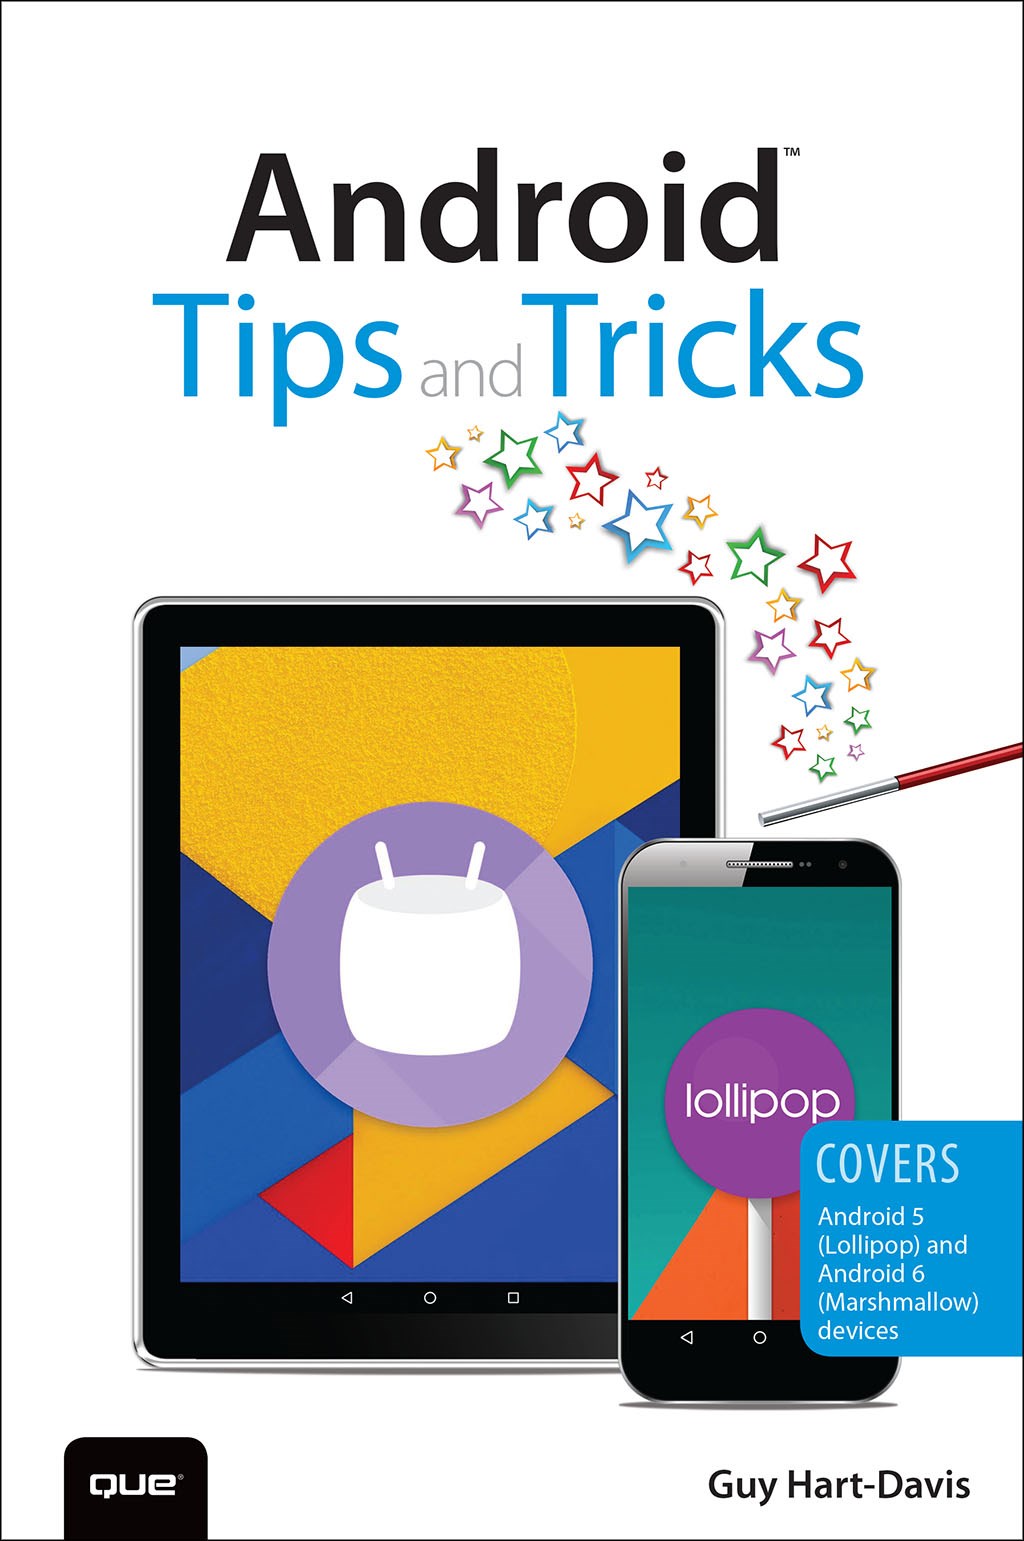 Android Tips and Tricks: Covers Android 5 and Android 6 devices, 2nd Edition